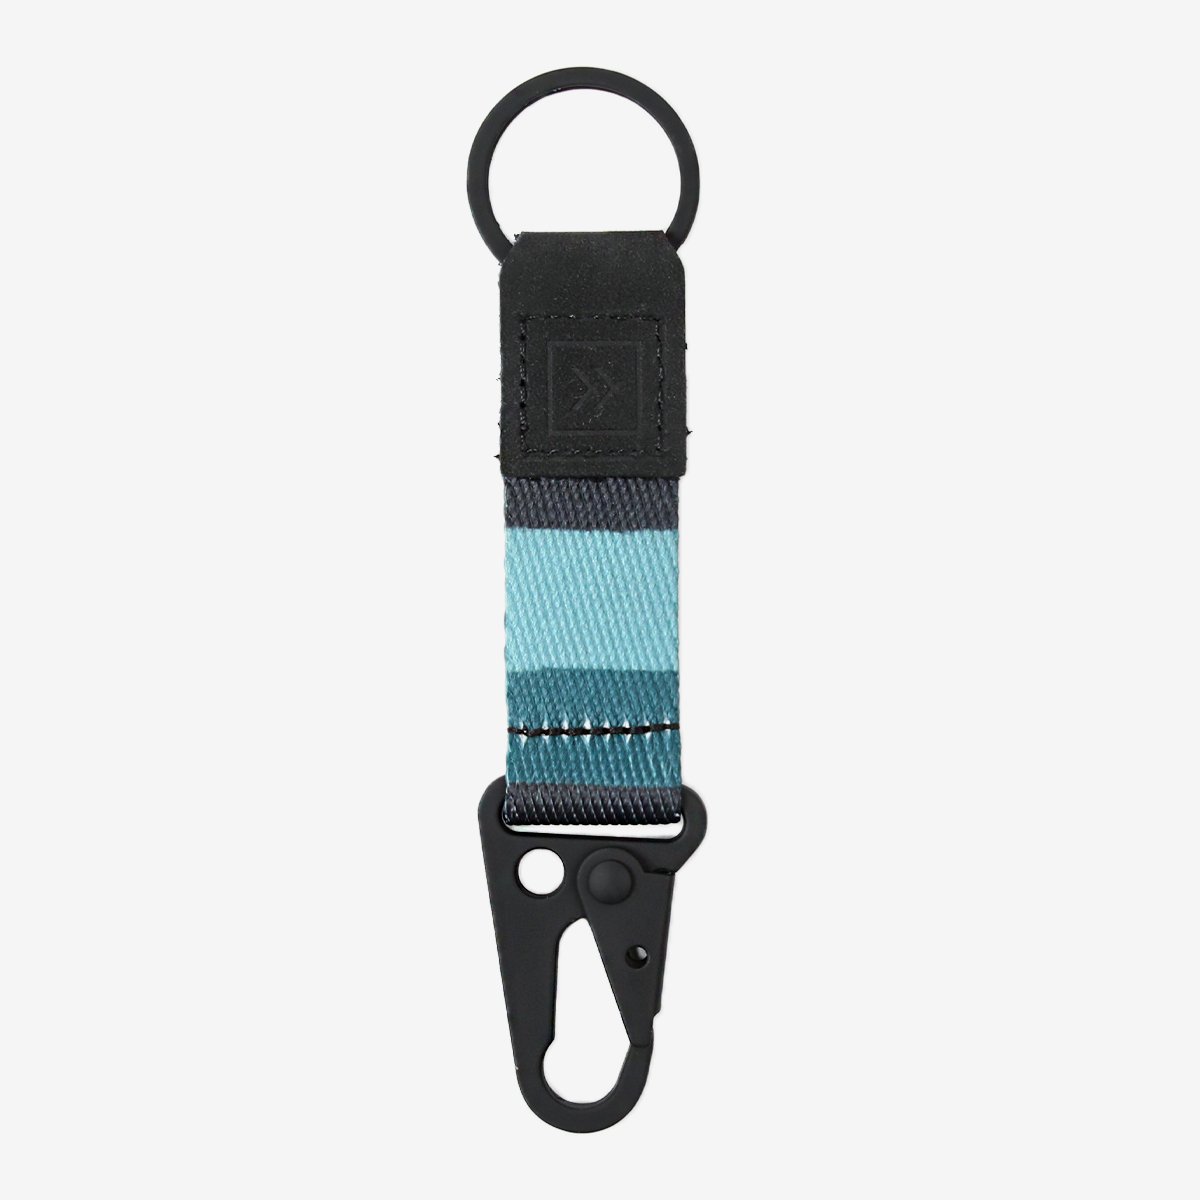 Blue and black striped keychain clip